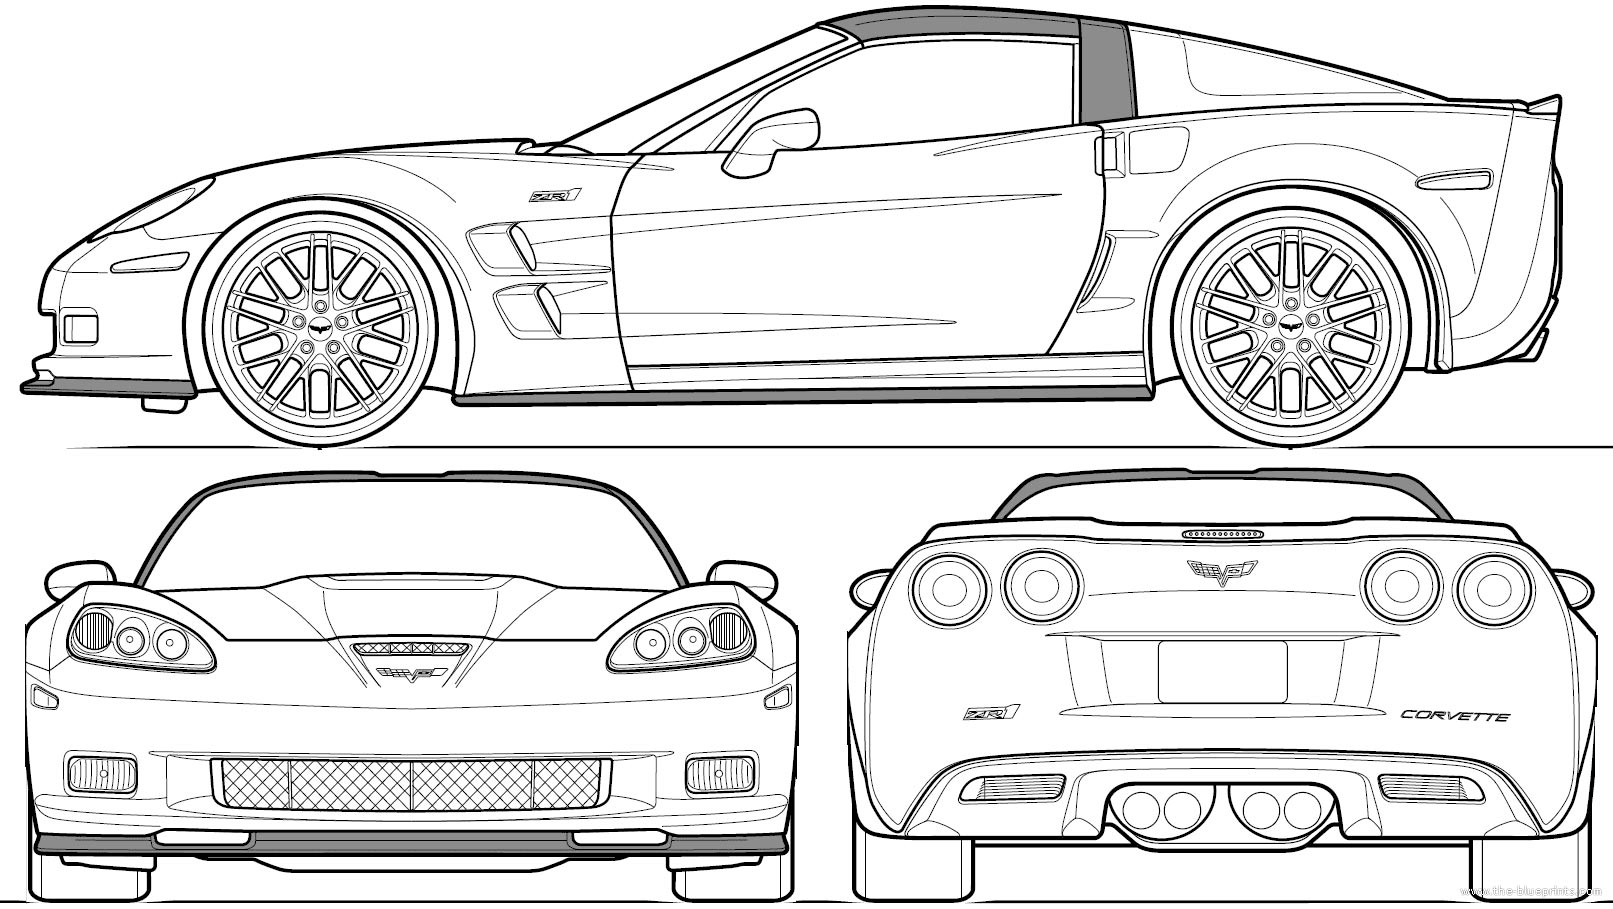 Fighting Boredom During Lockdown How About Some Corvette Coloring Pages Corvette Sales News Lifestyle Cars coloring page ferrari laferrari f150 letmecolor. corvette coloring pages